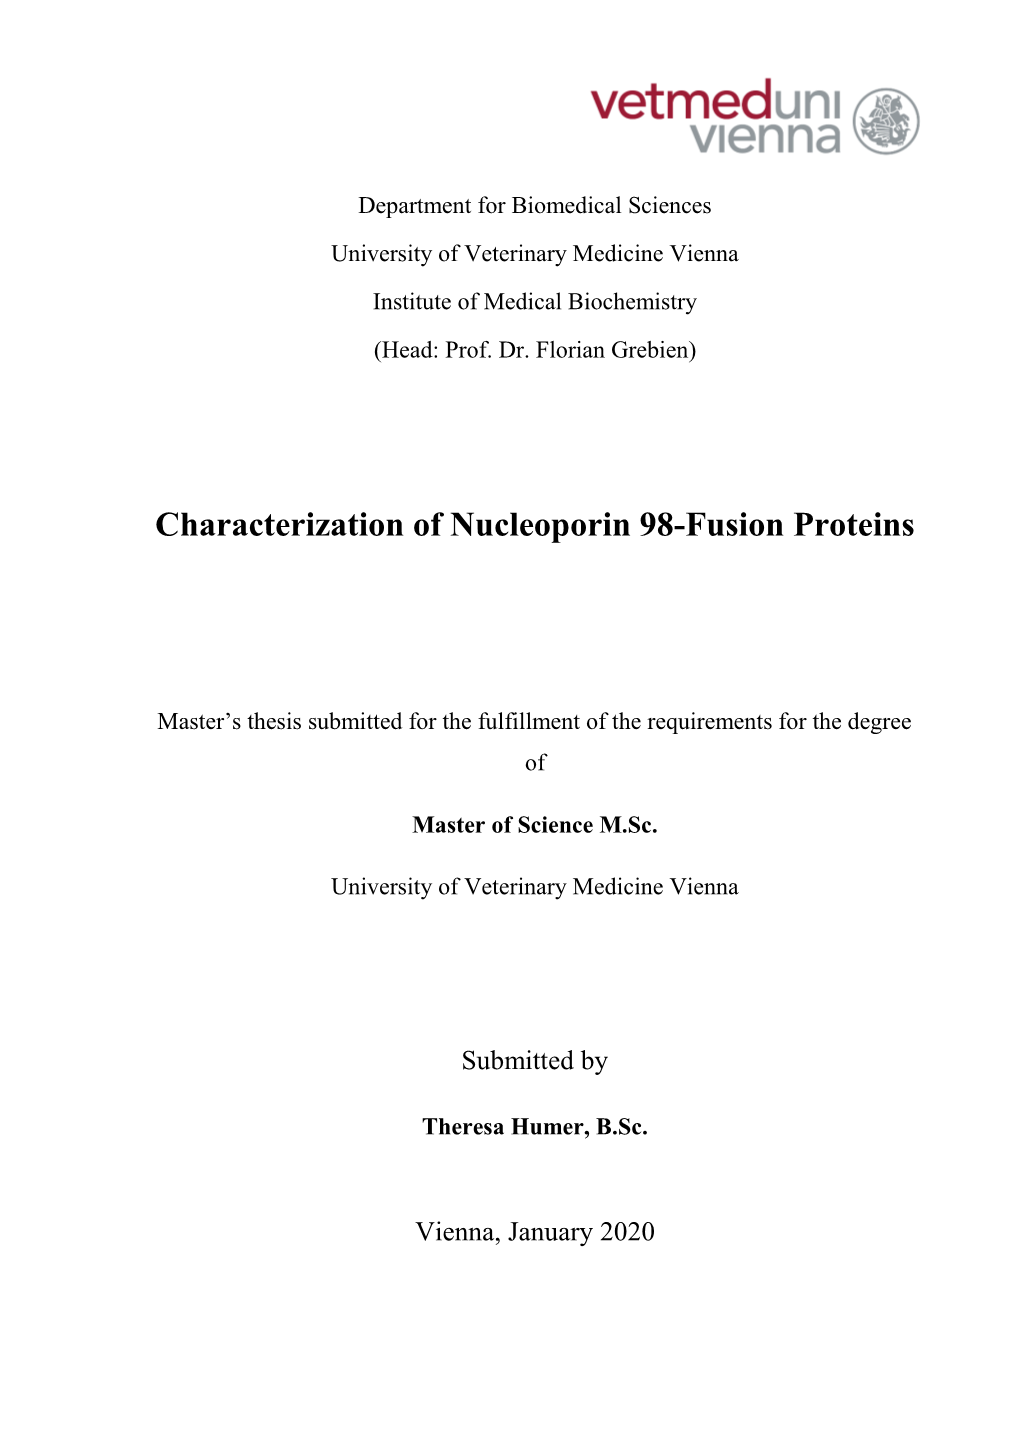 Characterization of Nucleoporin 98-Fusion Proteins